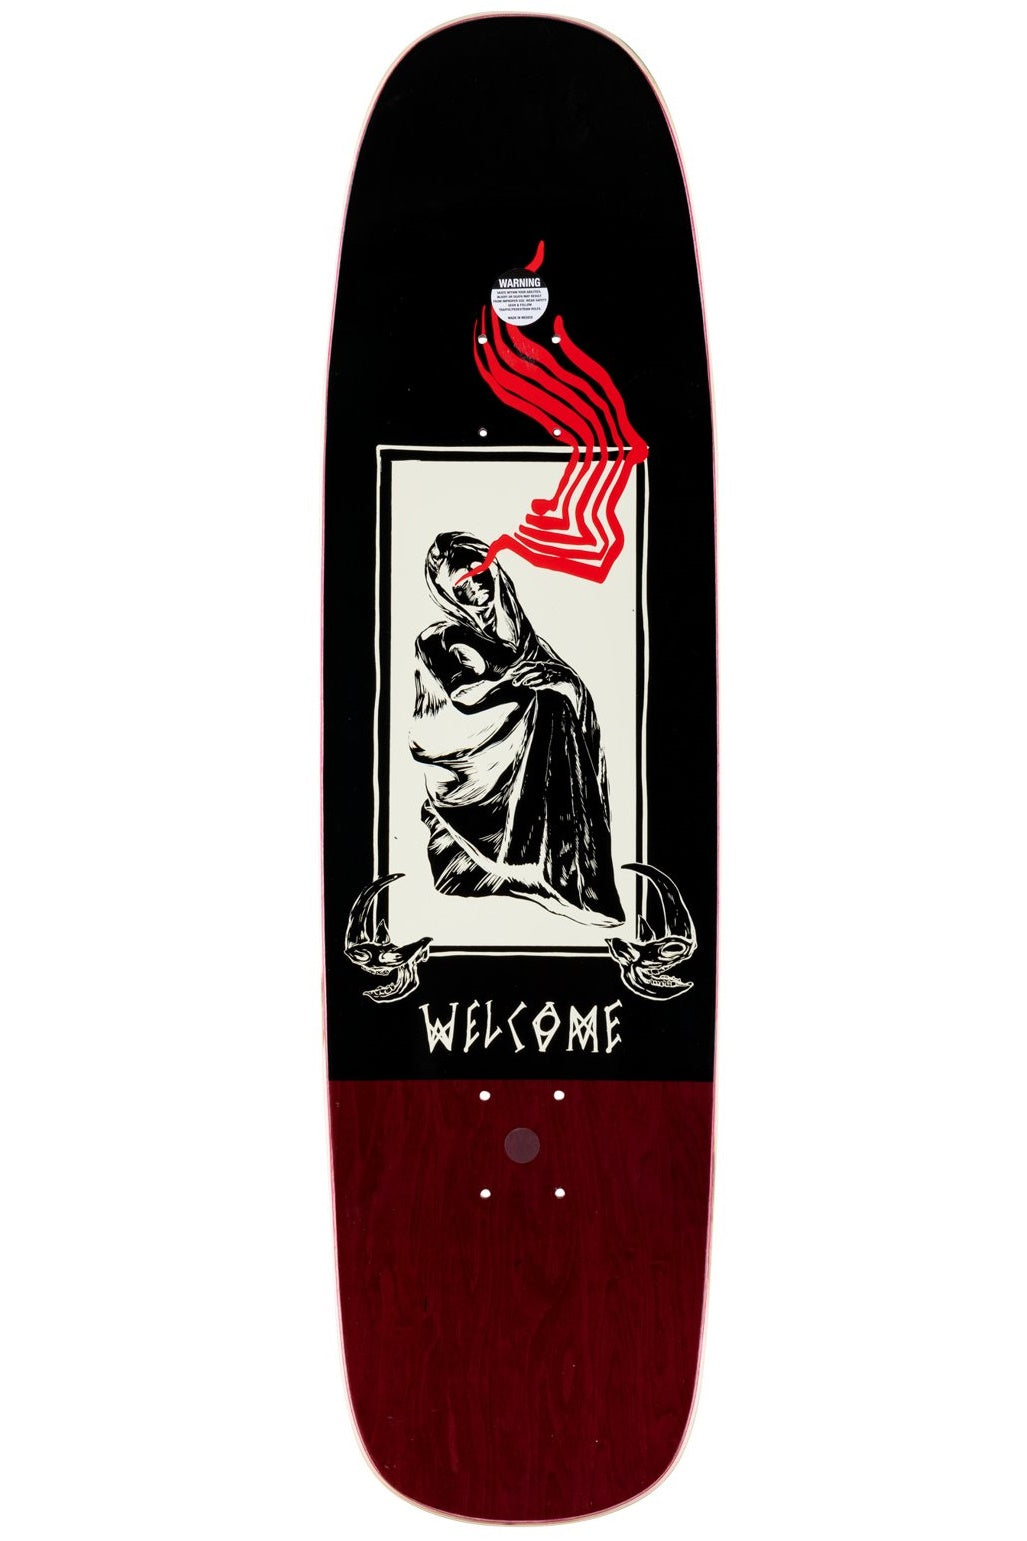 WELCOME Unholy Diver on Son of Golem Deck 8.75"